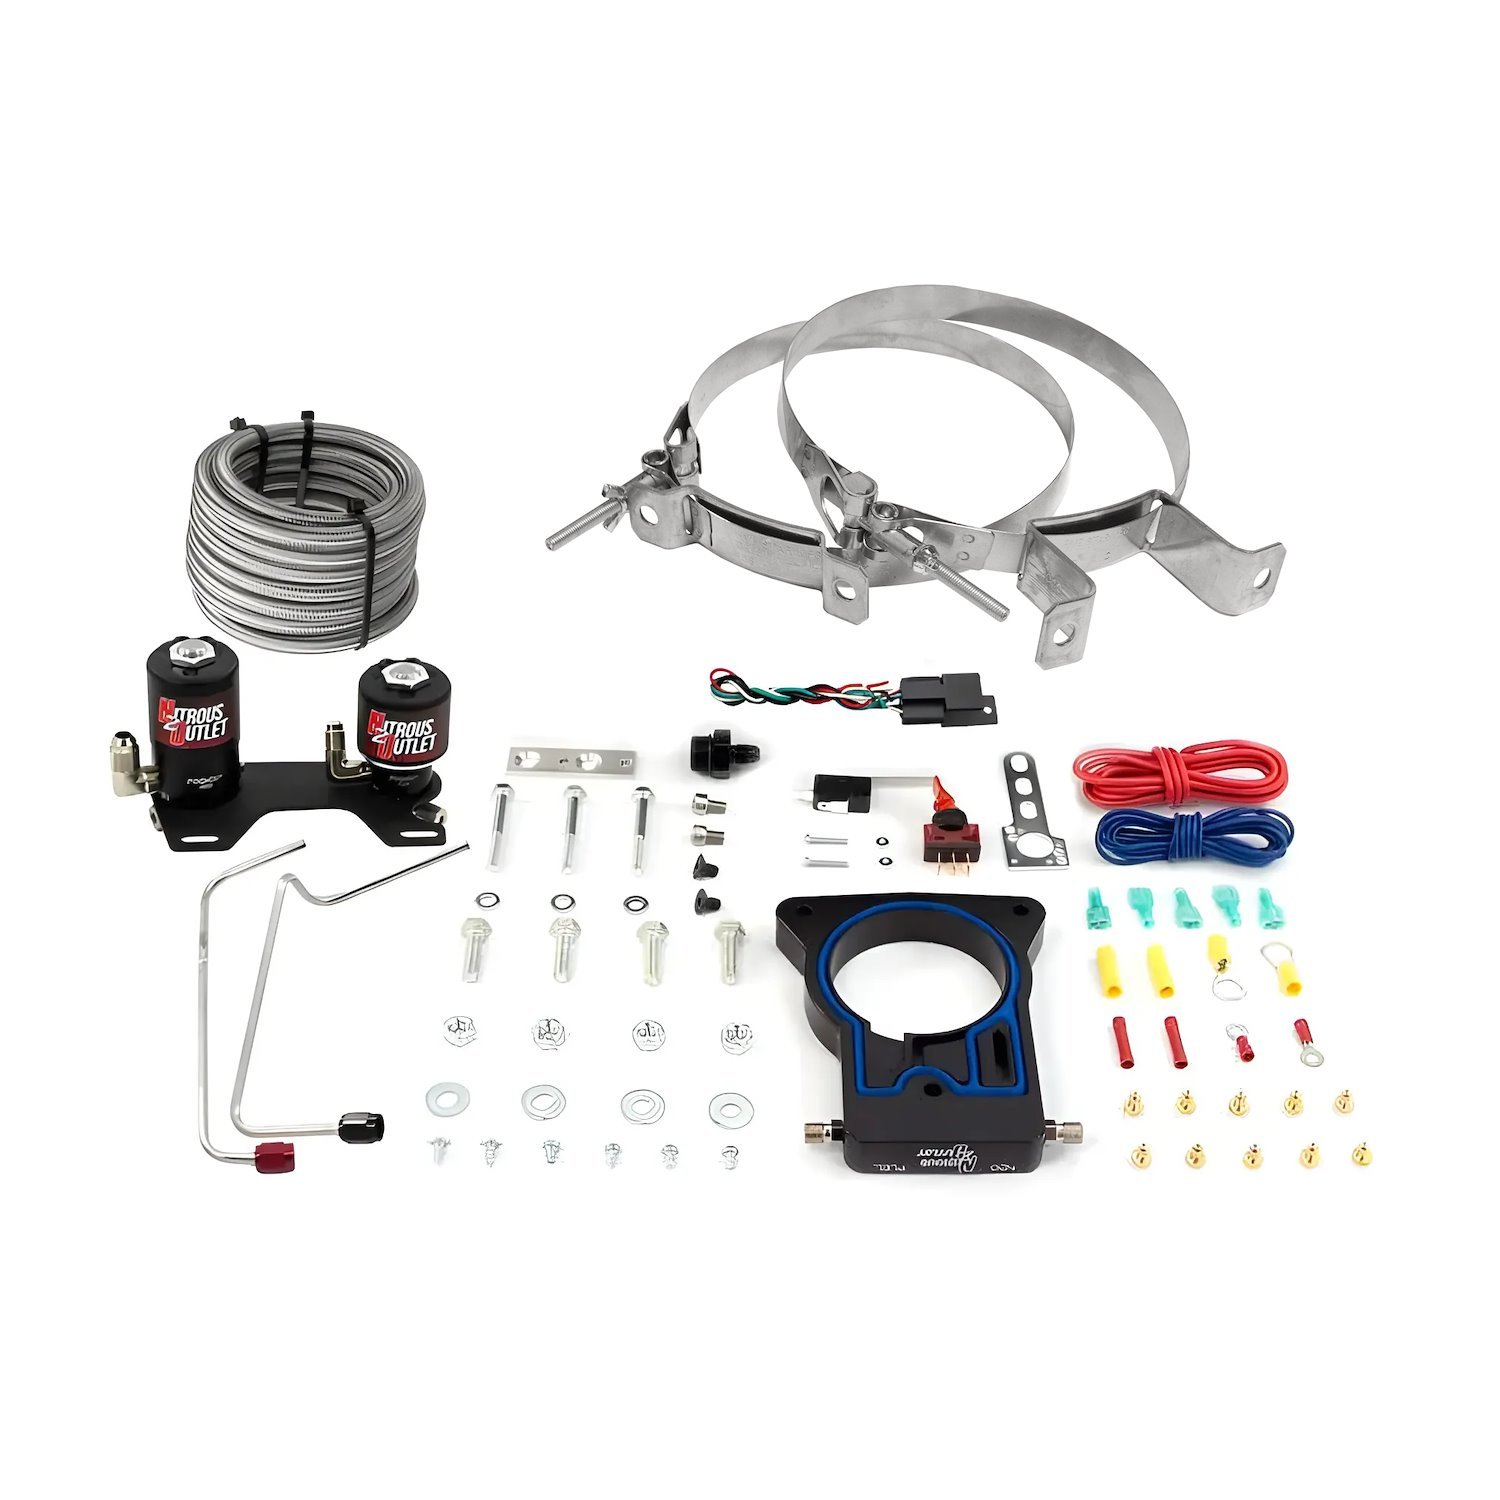 00-10127-00 GM 78 mm 1999-2007 Classic Truck Hard-Line Plate System, Gas/E85, 5-55psi, 50-200HP, No Bottle